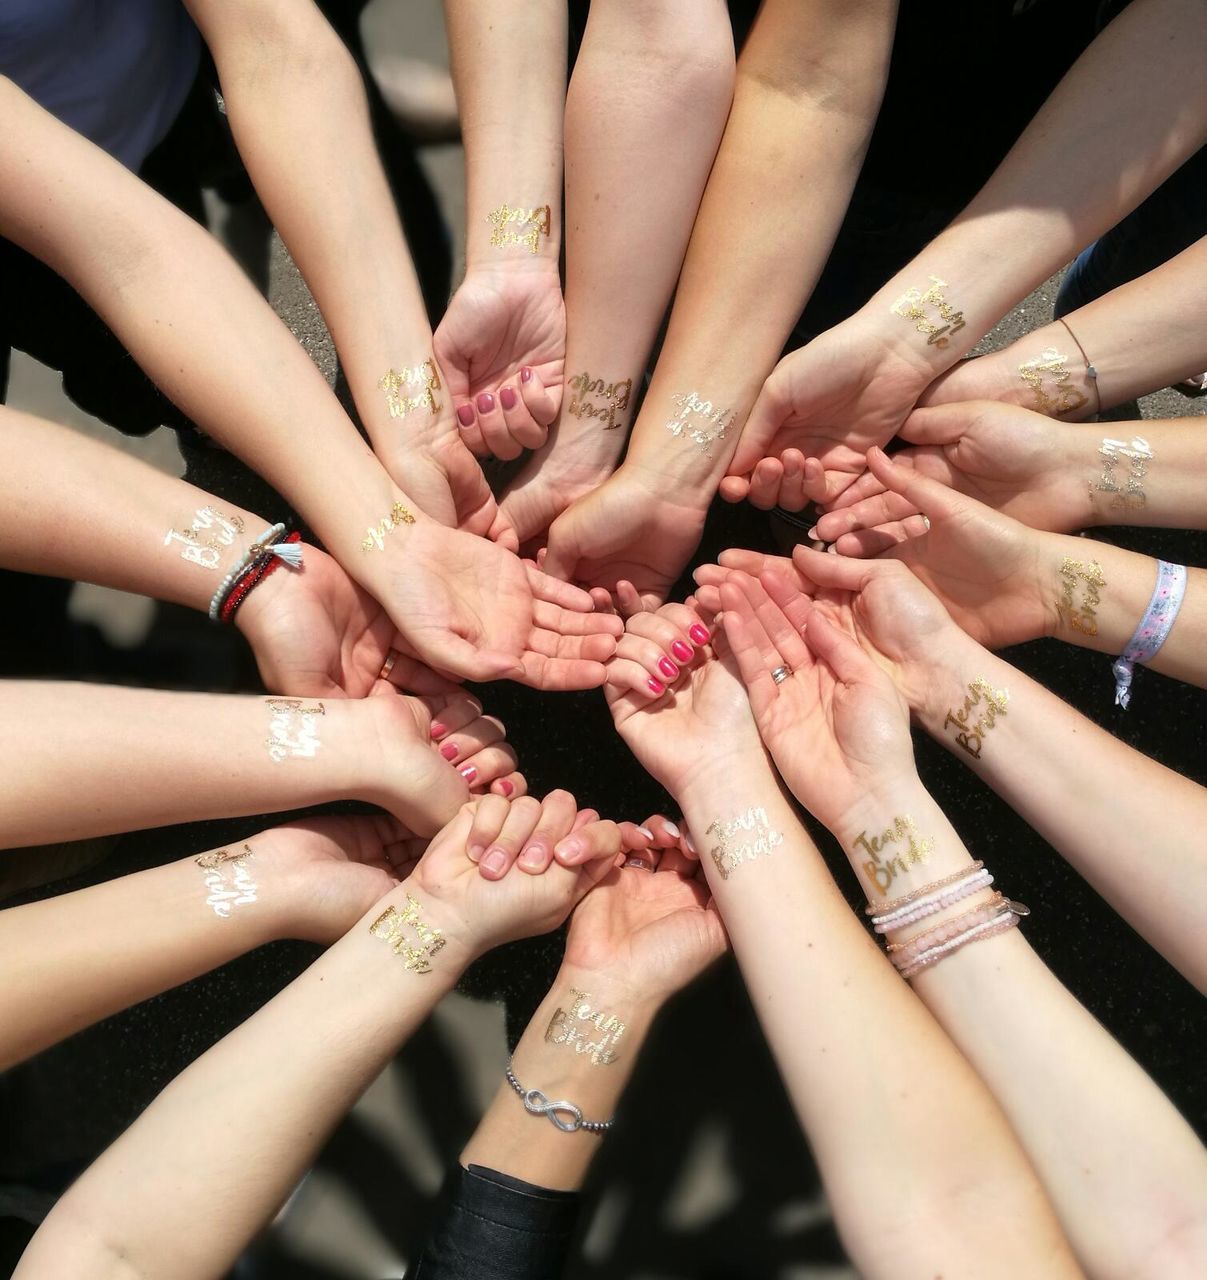 human hand, hand, group of people, human body part, real people, togetherness, unity, cooperation, human finger, large group of people, group, teamwork, finger, body part, women, crowd, connection, high angle view, human limb